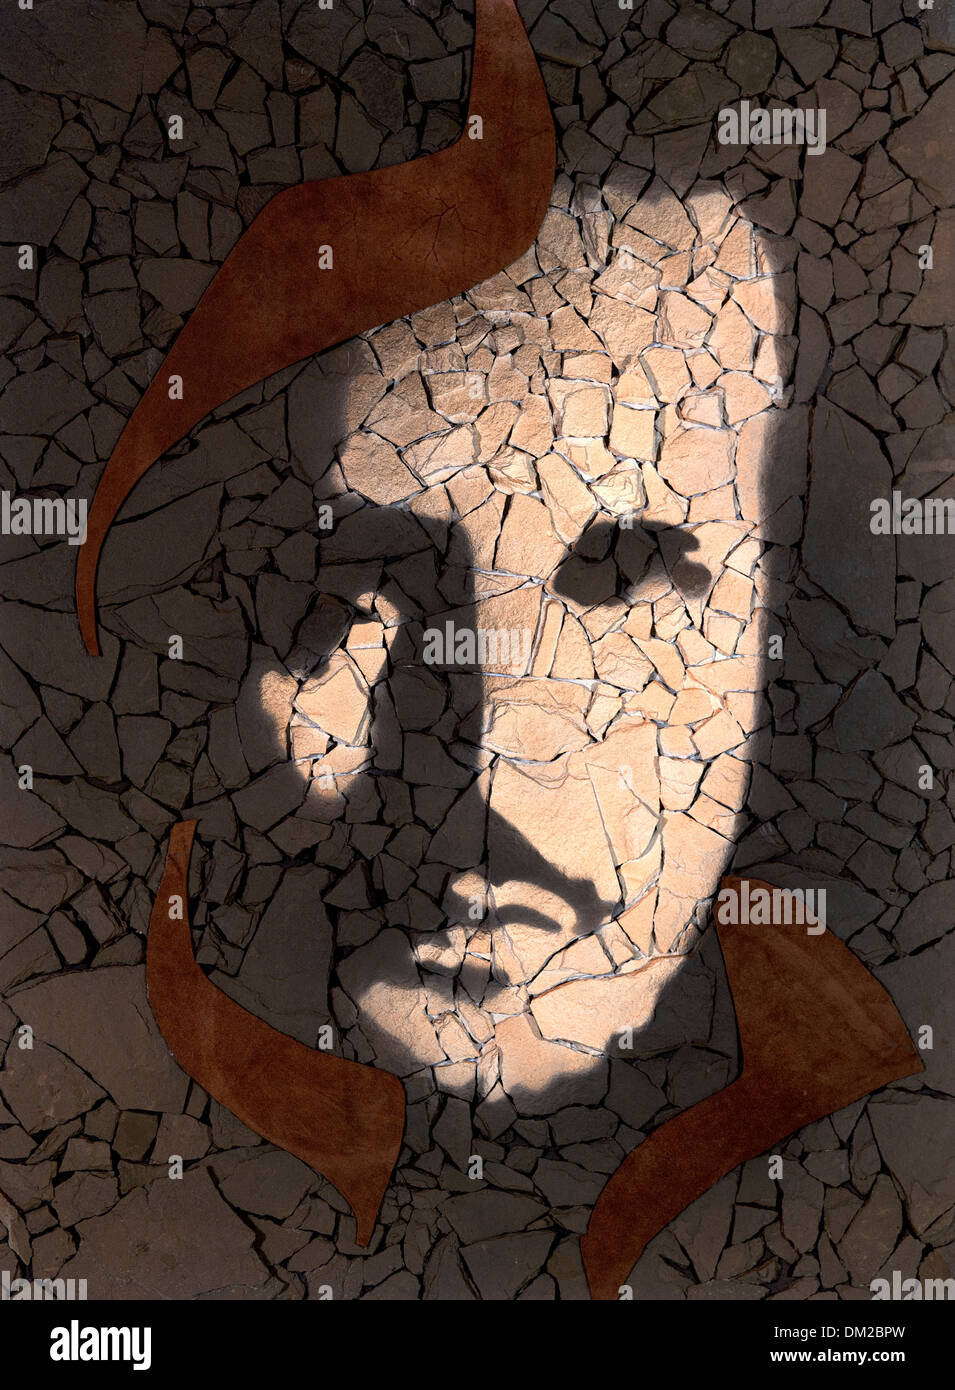 picture done by me showing a male face painted on fragmented stone pieces Stock Photo